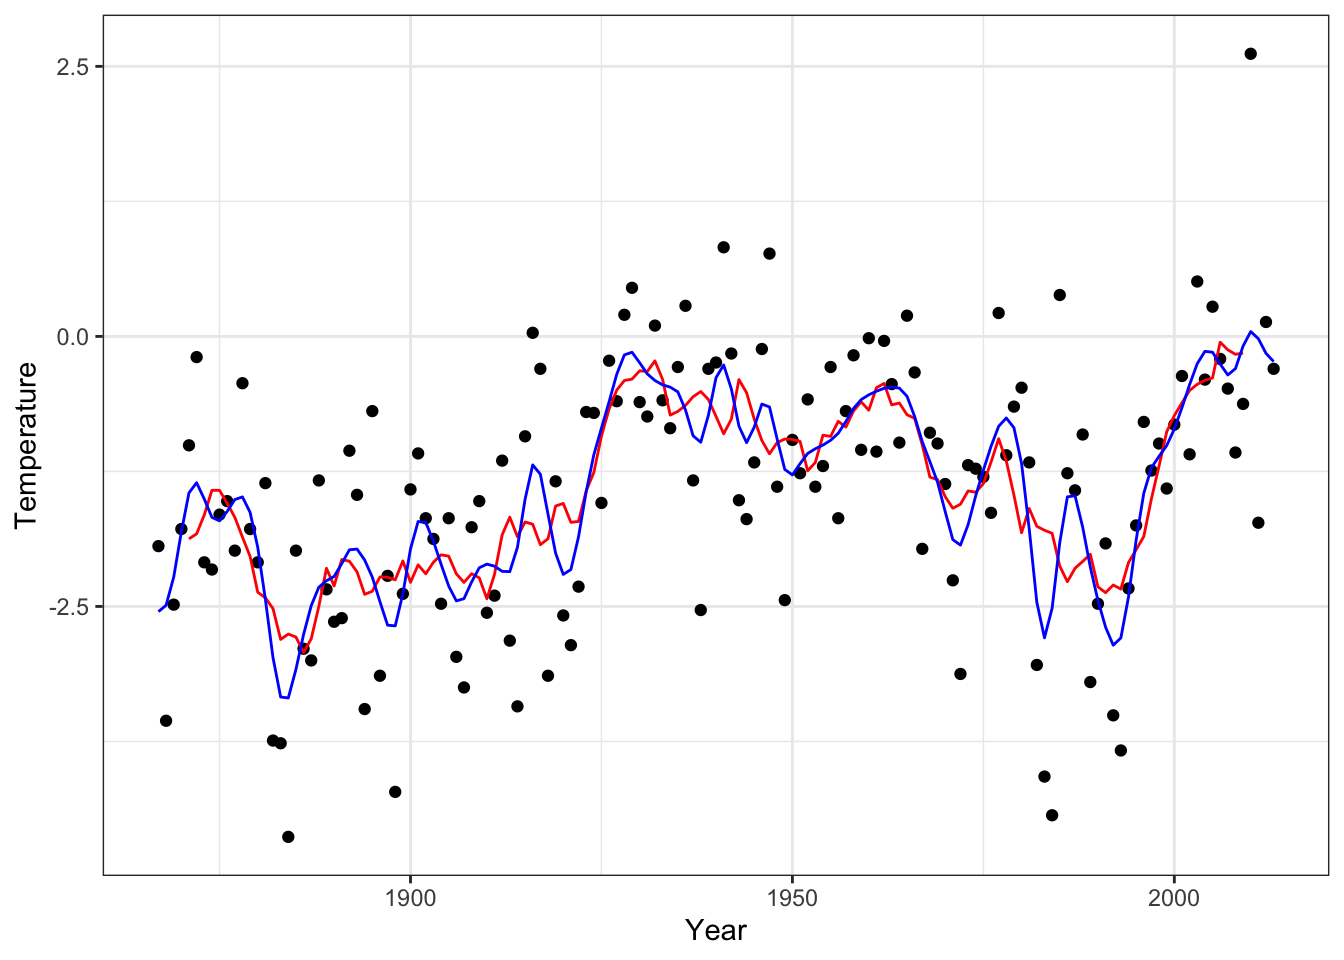 Nadaraya–Watson kernel smoother of the annual average temperature in Nuuk for the optimal bandwidth using LOOCV (blue) compared to the $k$-nearest neighbor smoother with $k = 9$ (red).